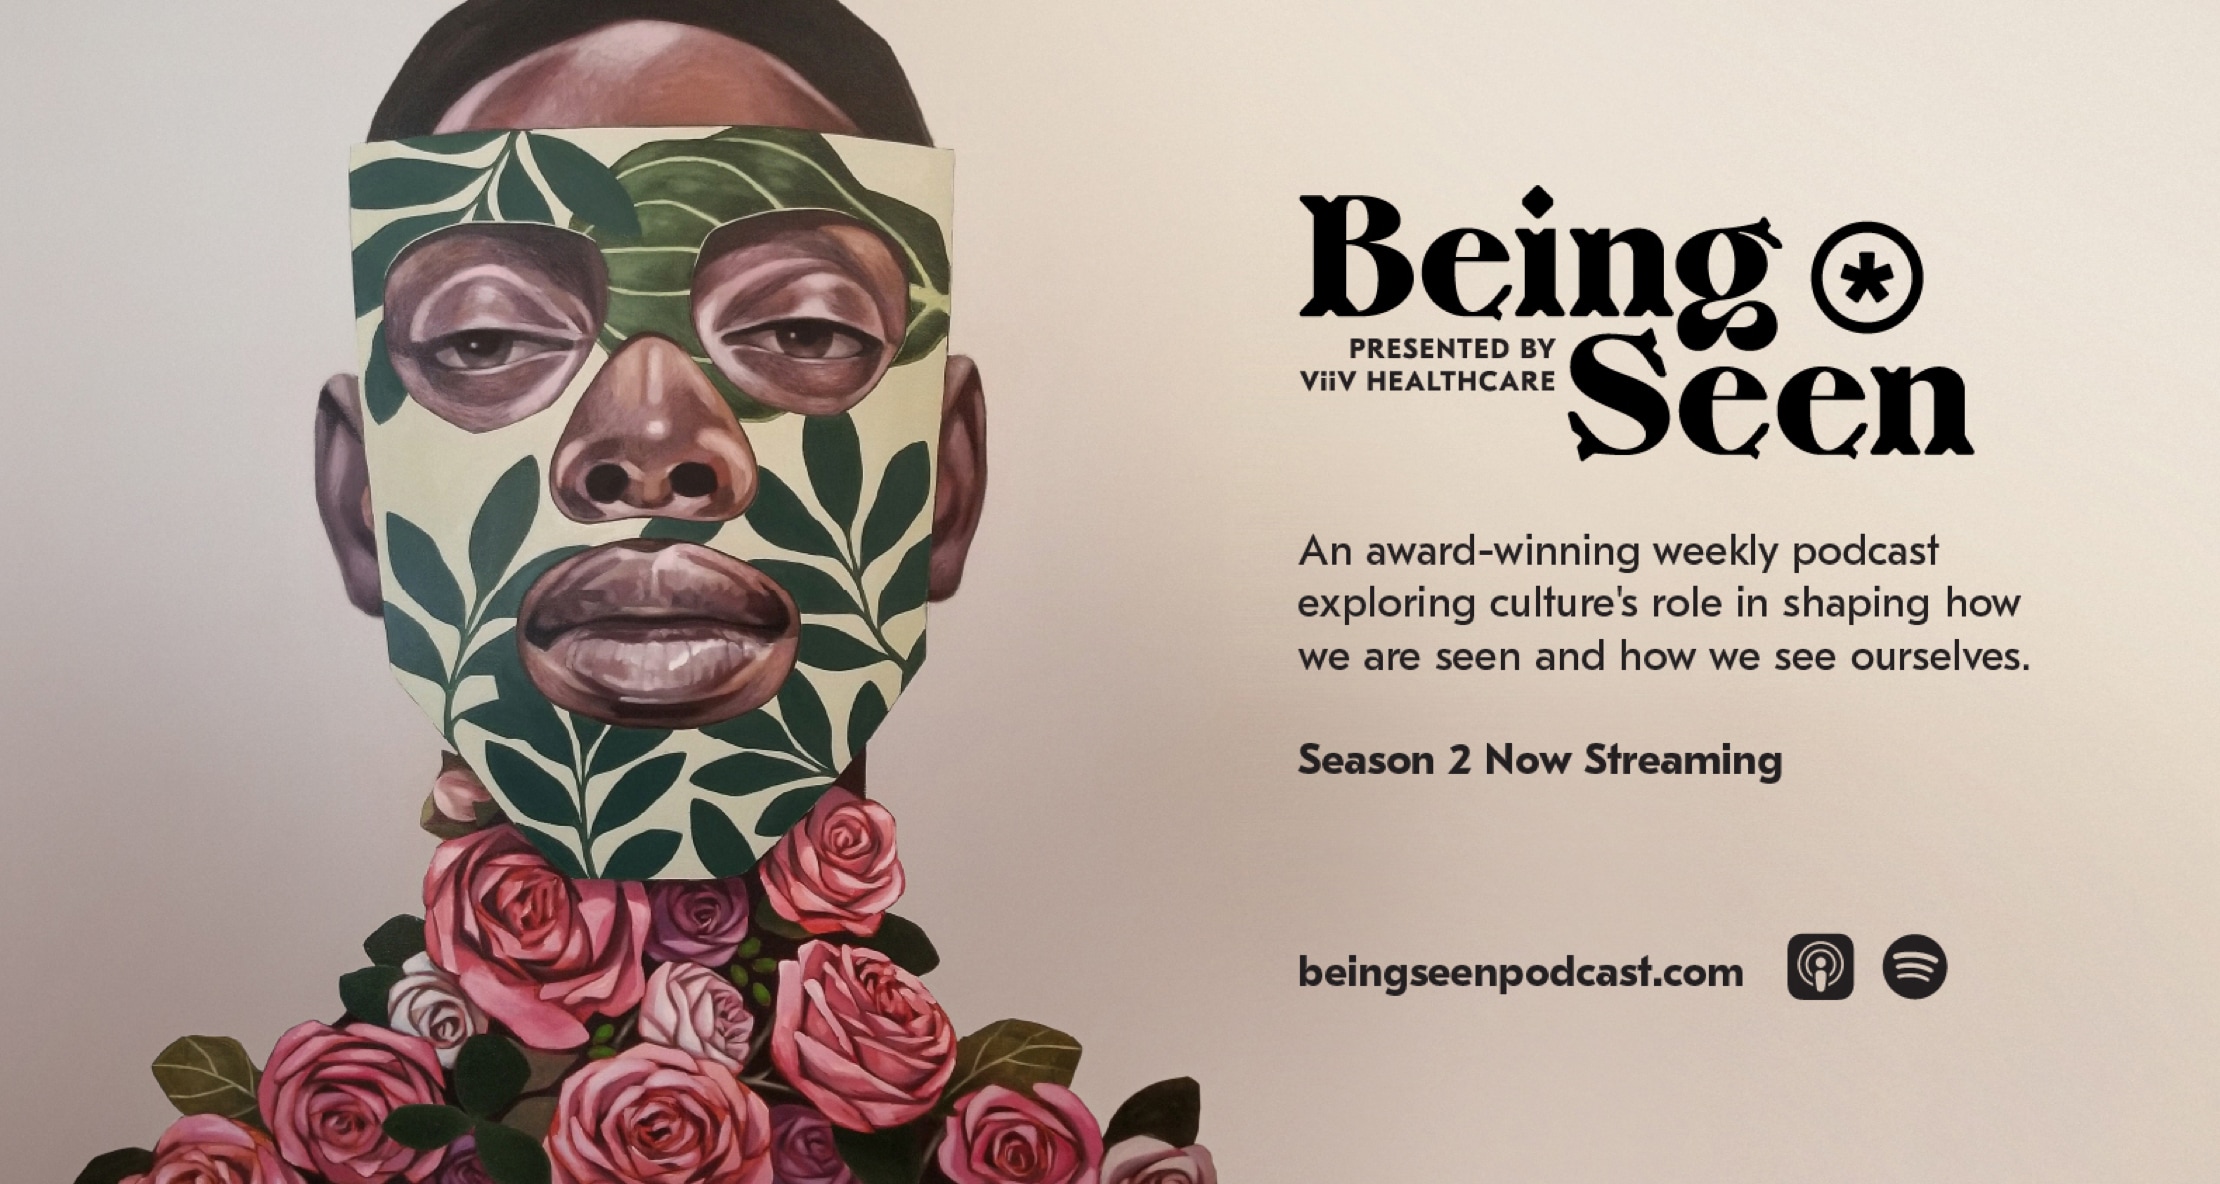 Being Seen podcast image and logo